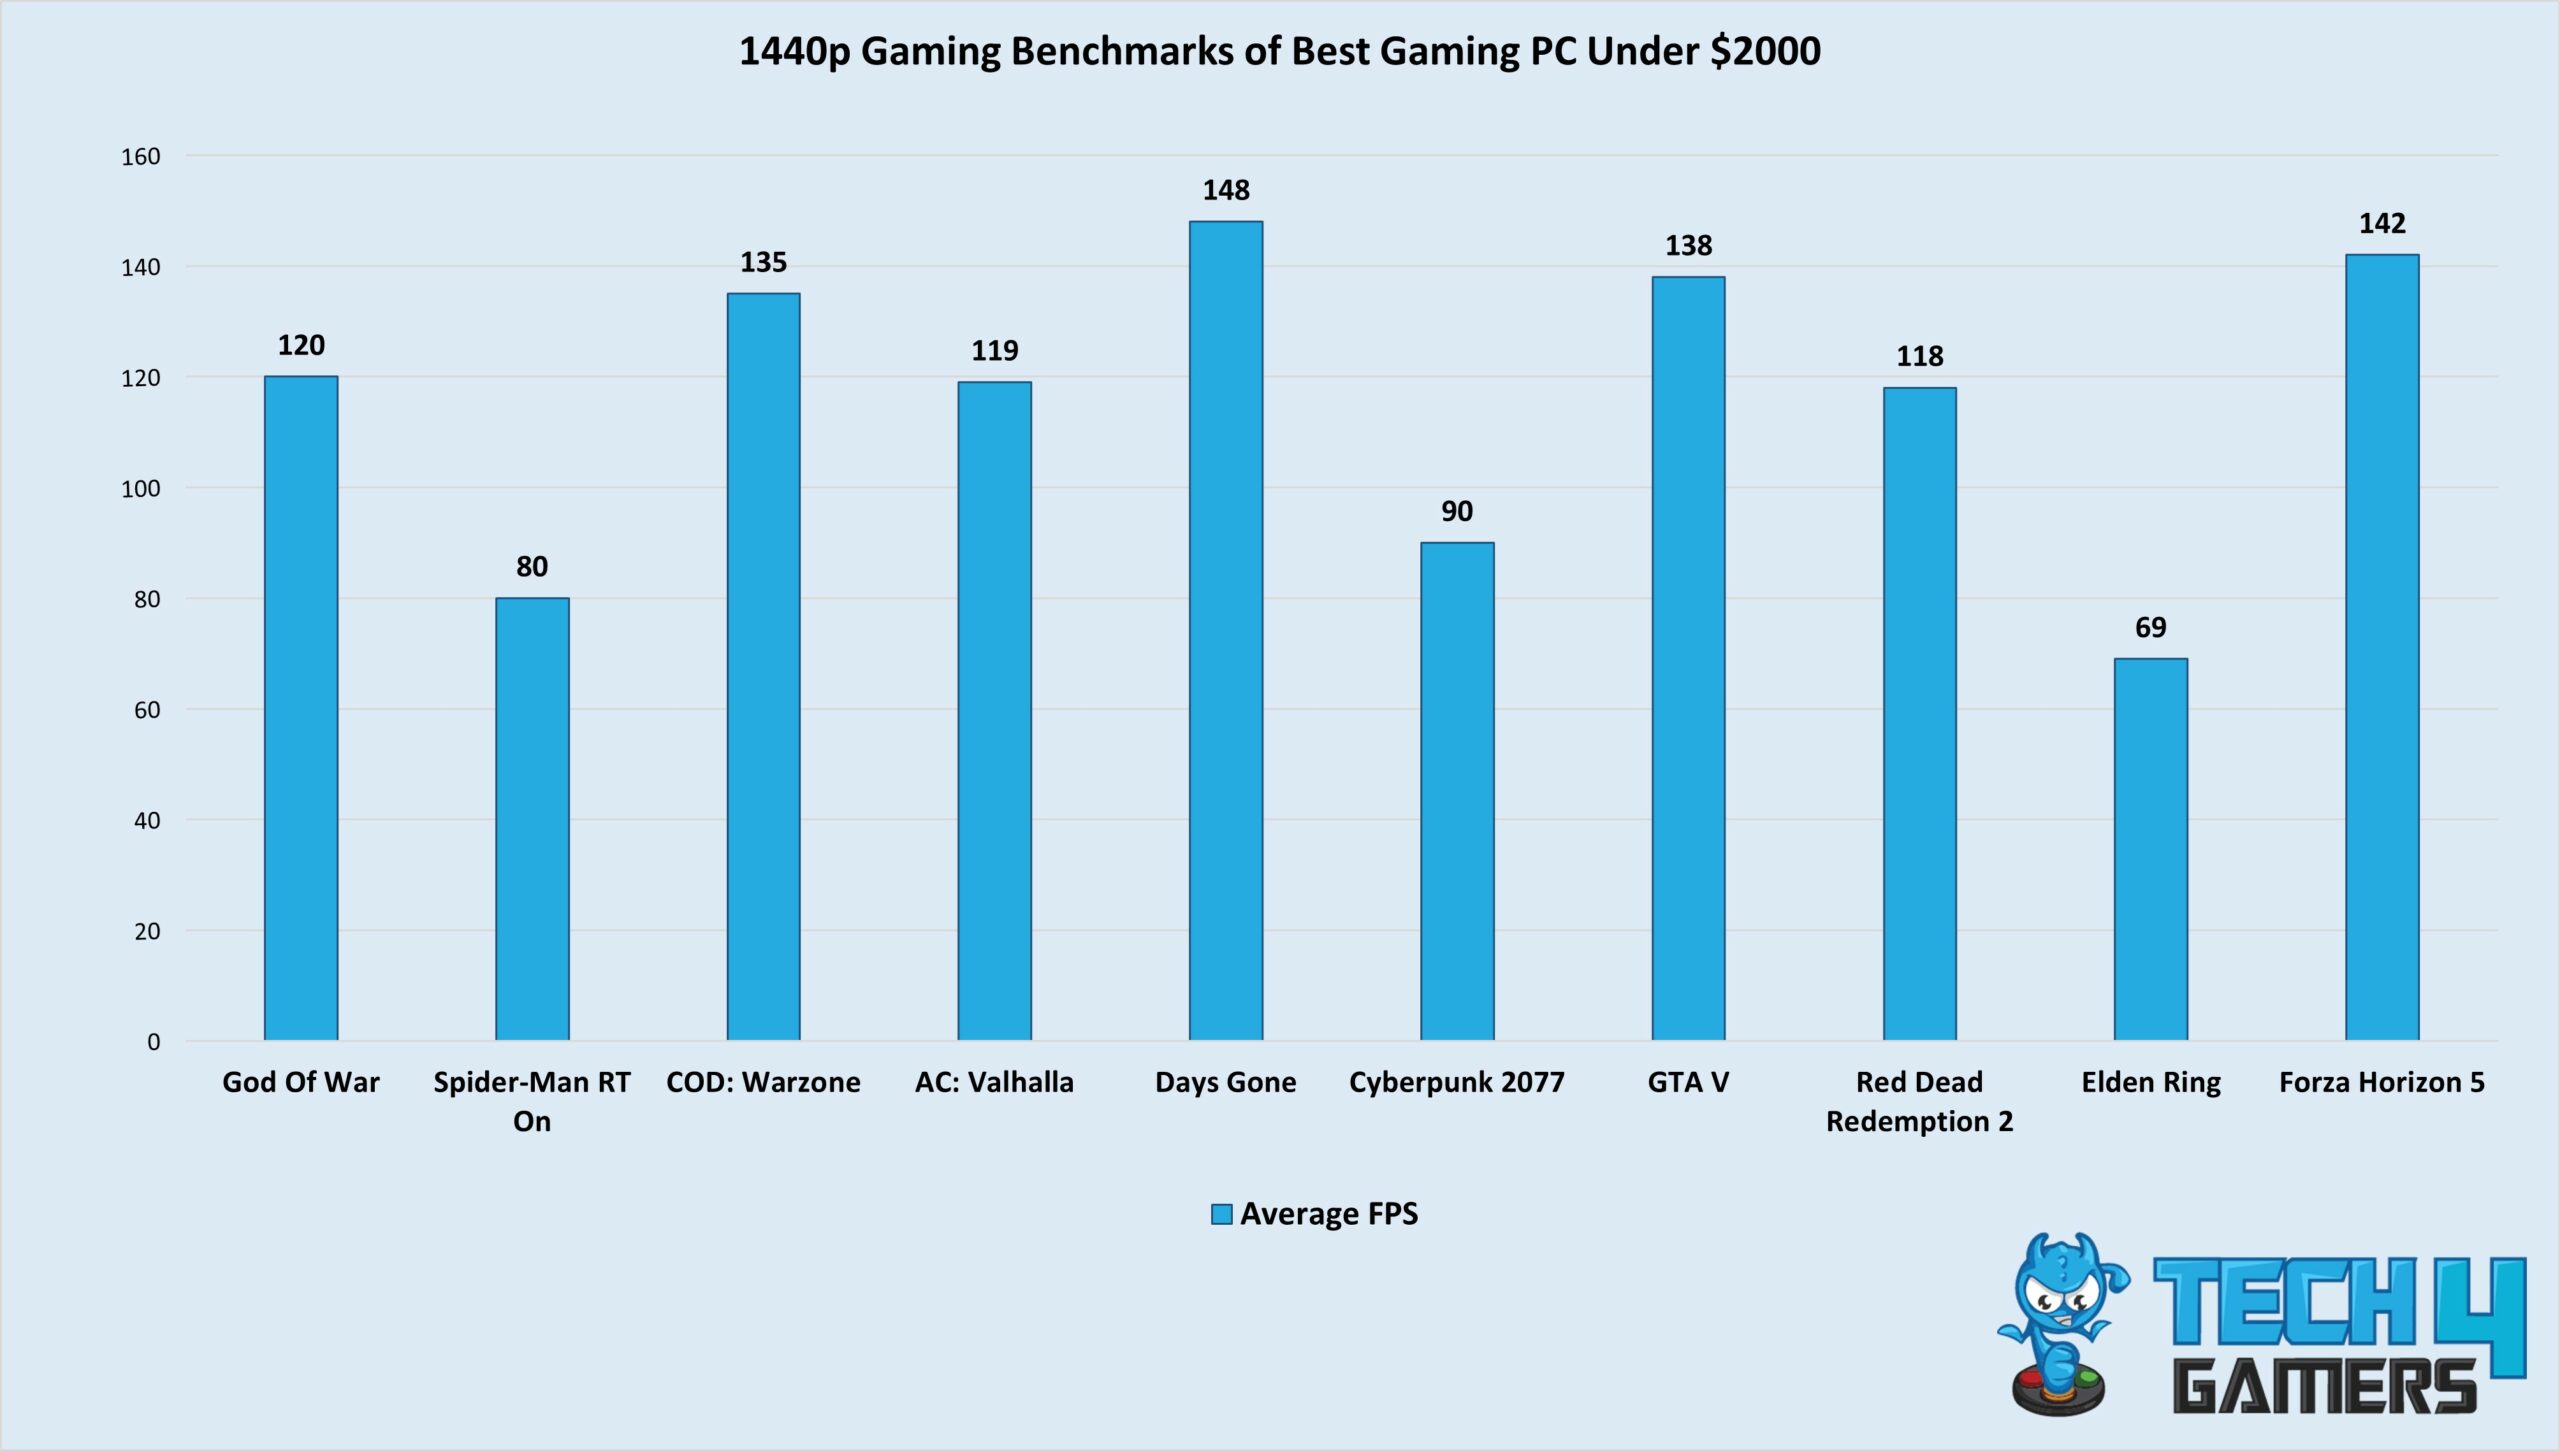 1440p Gaming Benchmarks of Best Gaming PC Under $2000